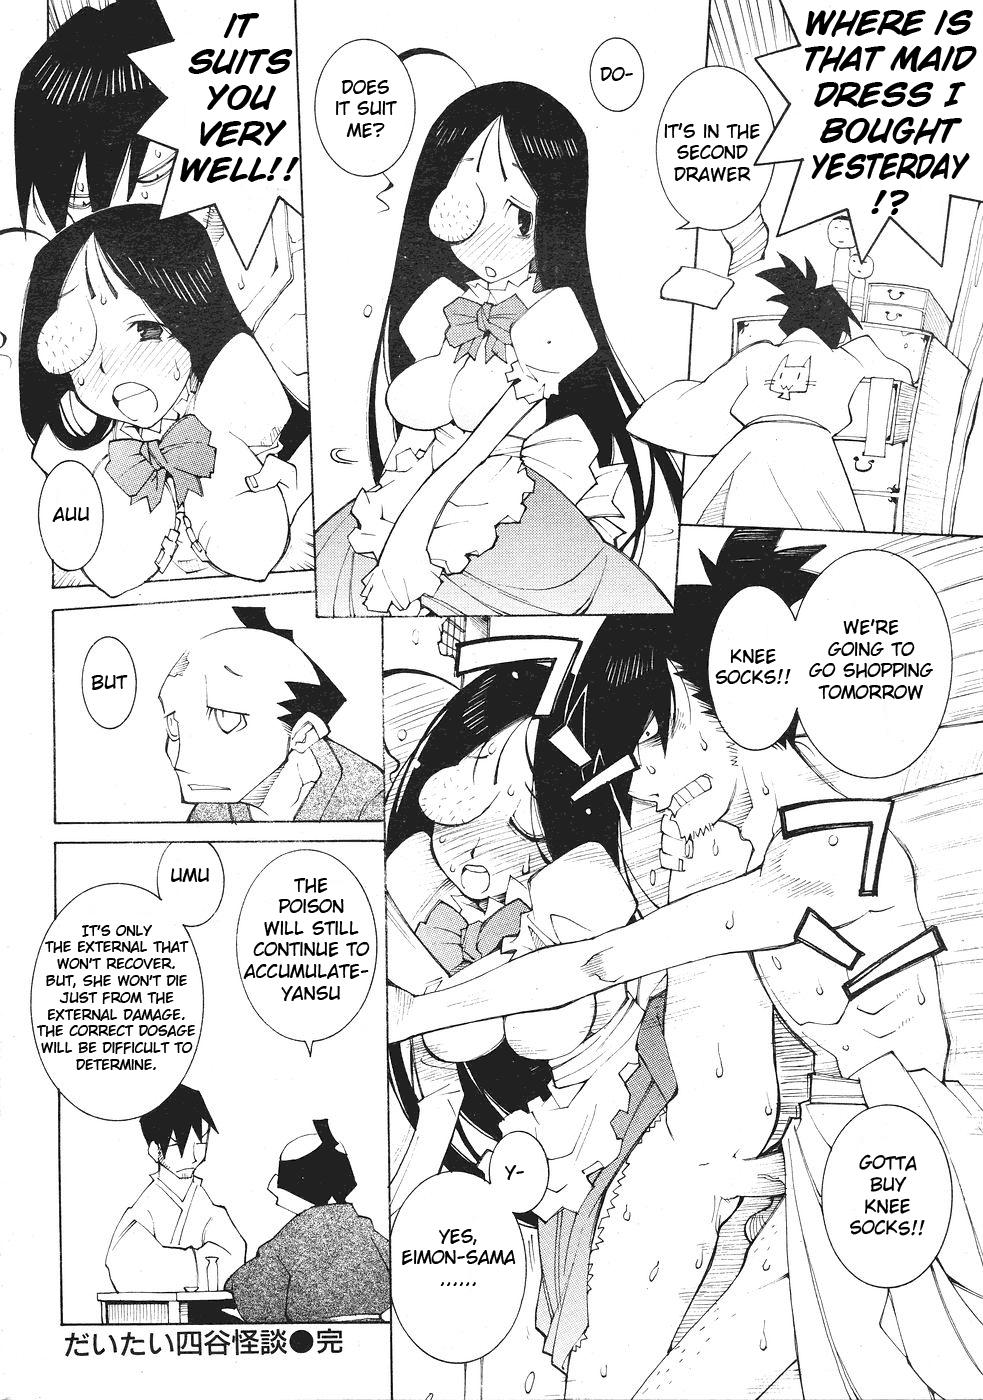 Old Vs Young A Substitute Yotsuya Ghost Story Puta - Page 4